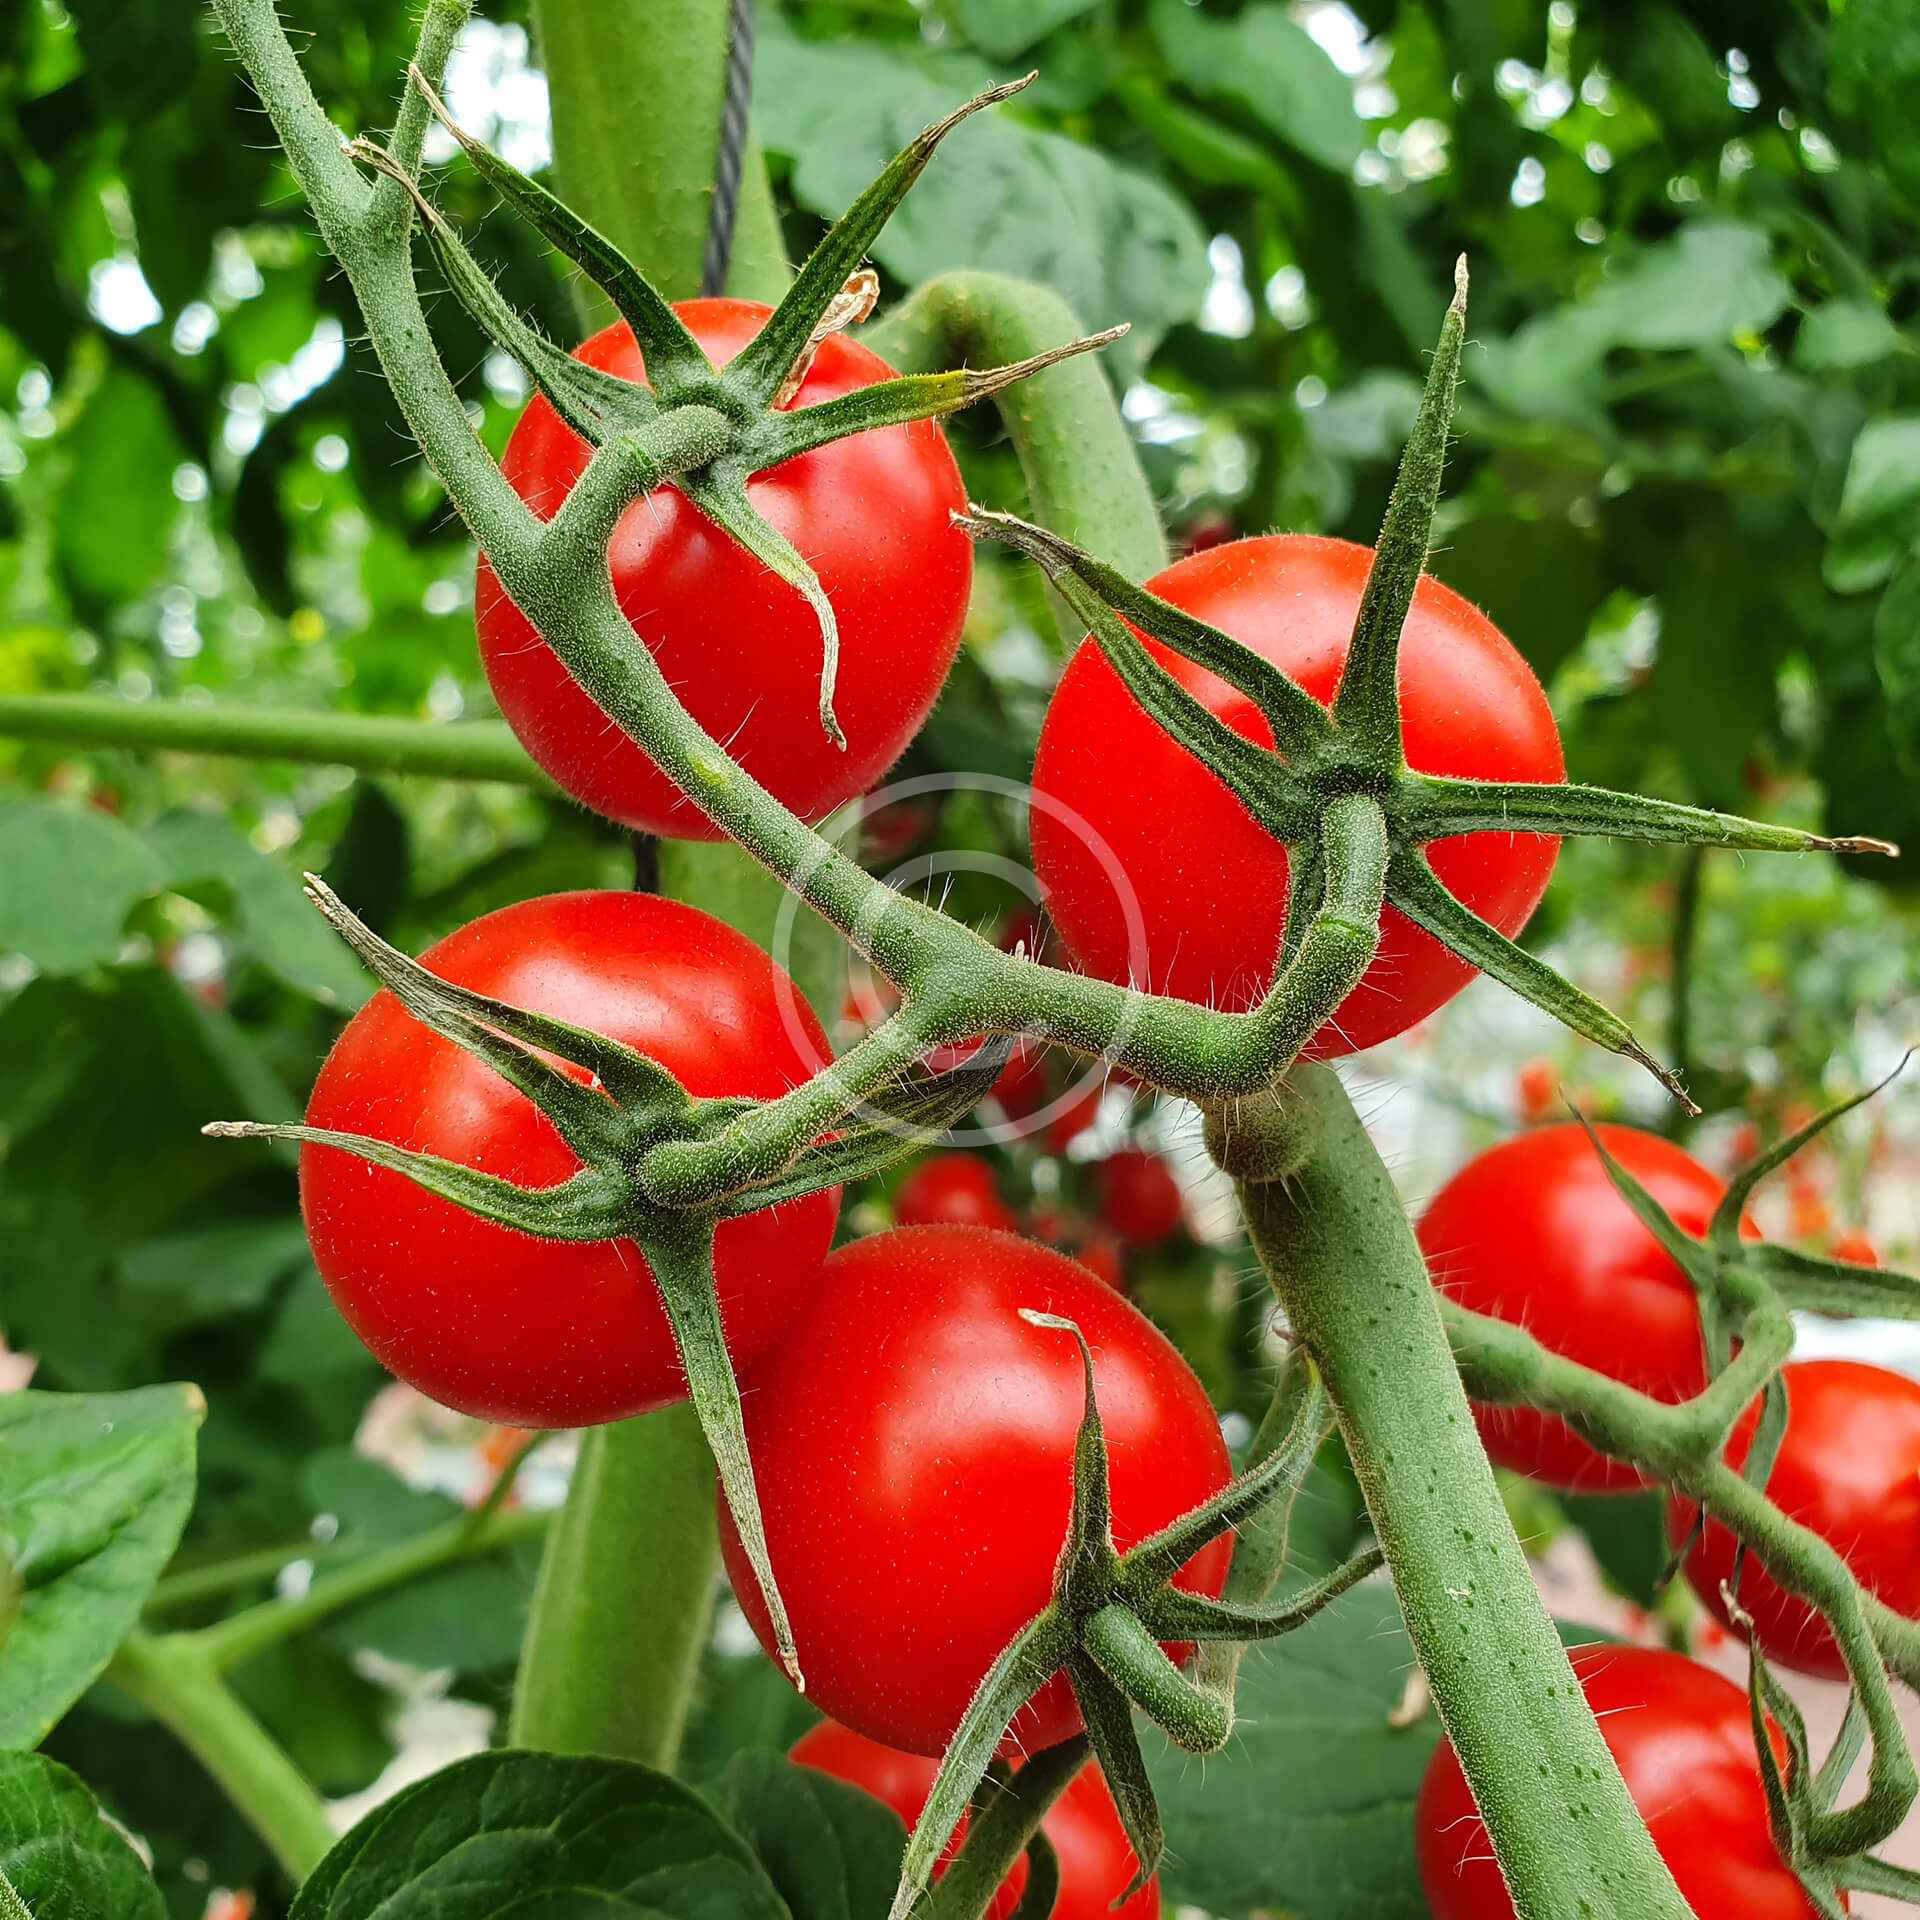 Perfect tomatoes